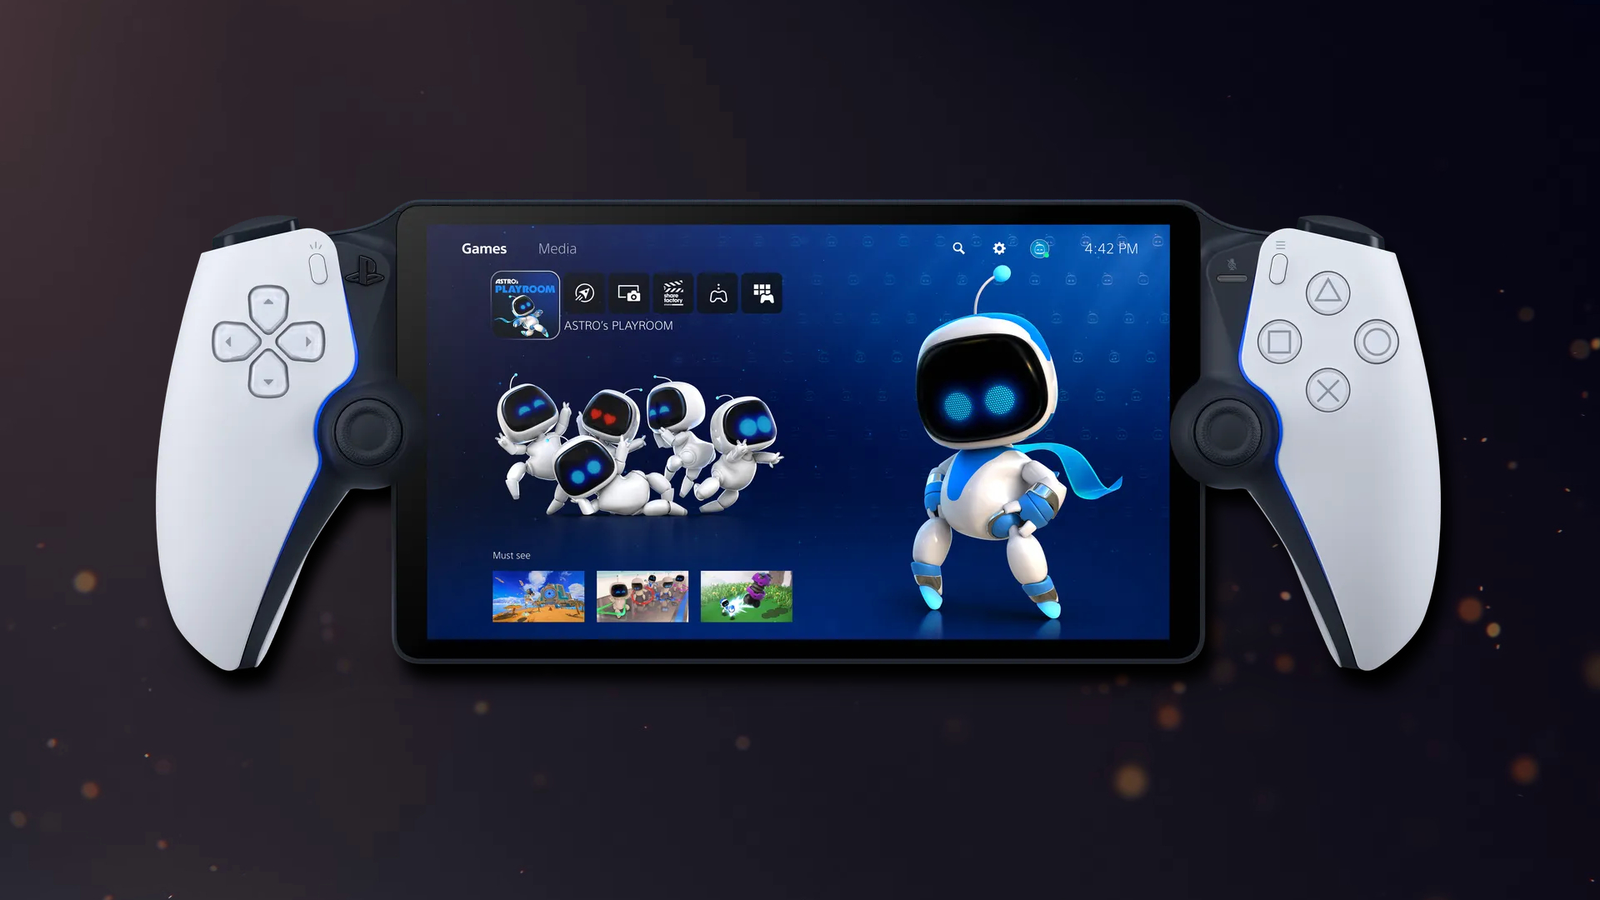 PlayStation Portal Review: a Cool Handheld for PS5 Owners, but Its Features  Are Limited